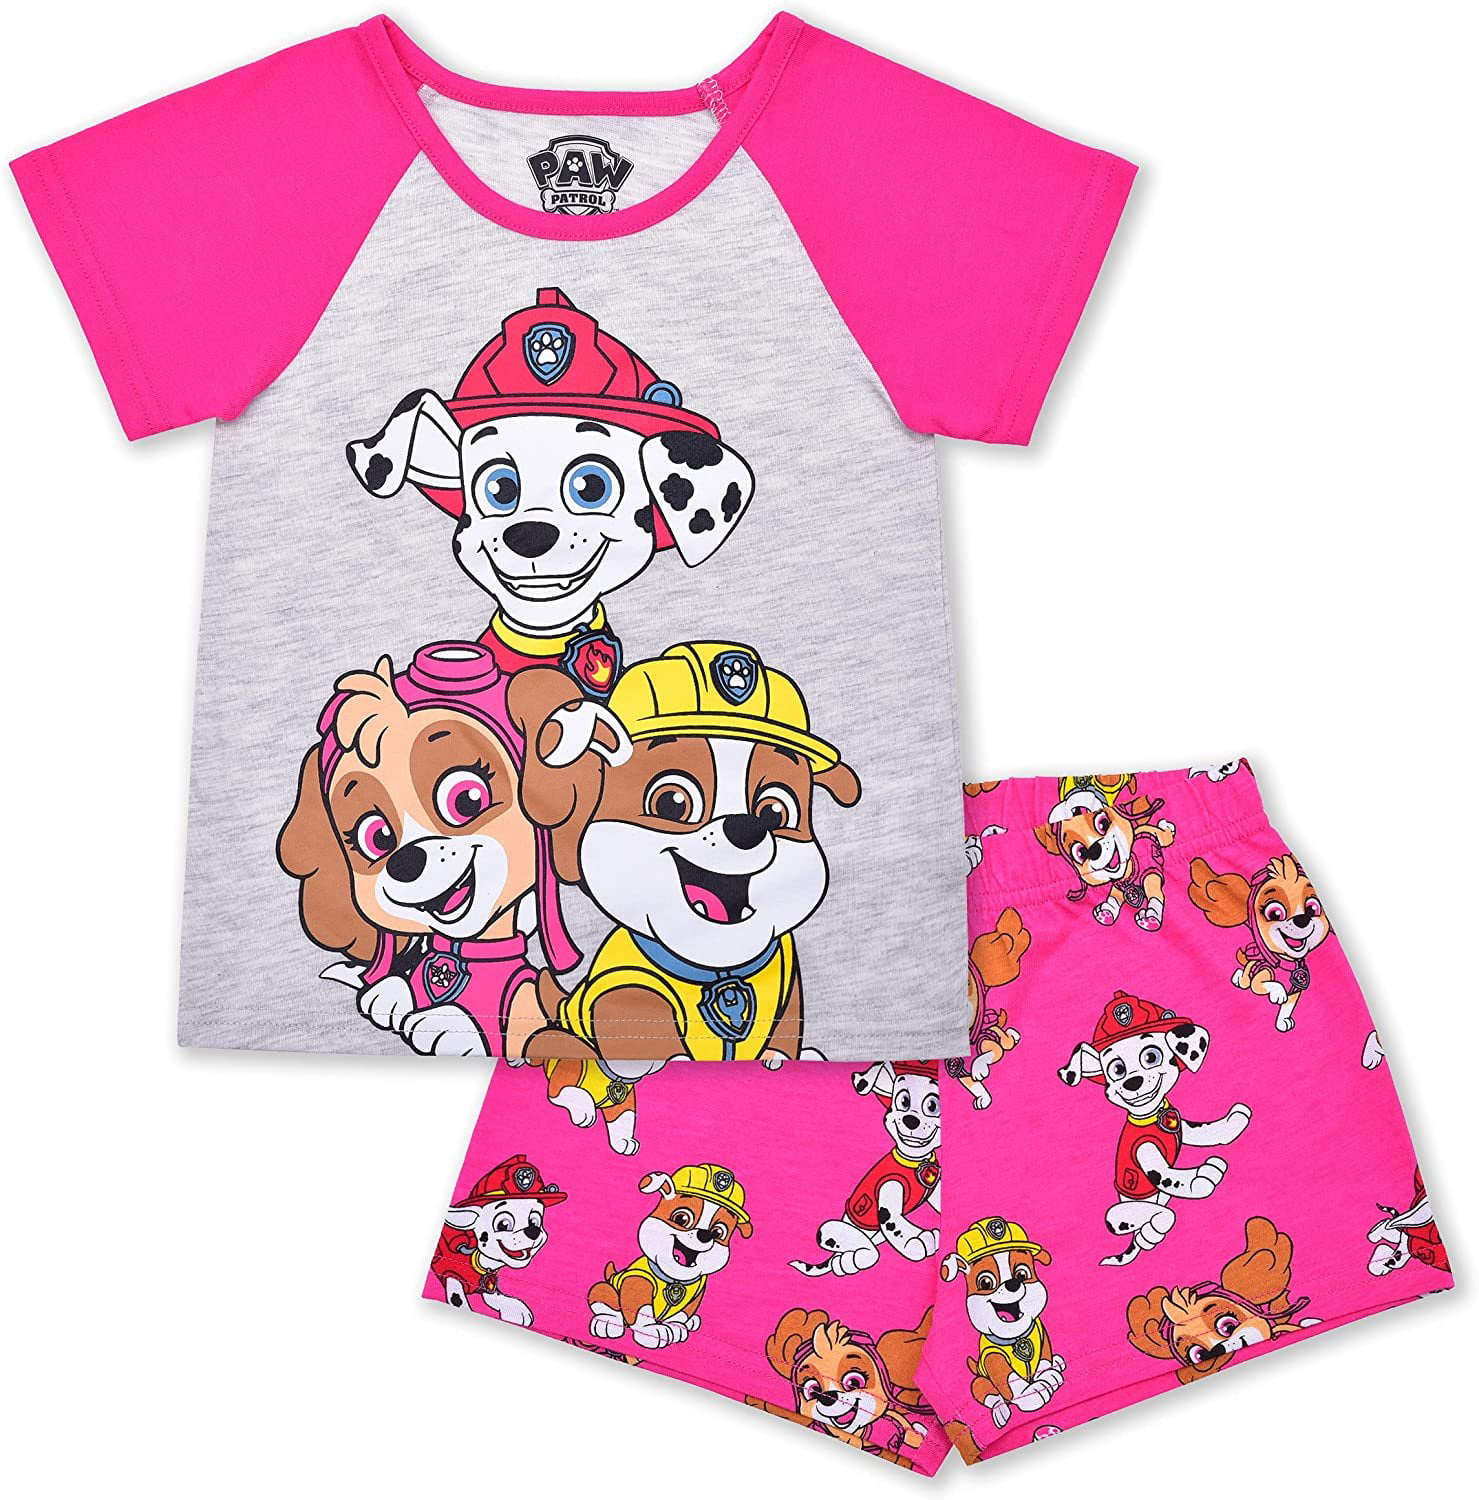 LOL Surprise 2 Pack Short Sleeves Tee and Shorts Set for Girls Kid’s Outfit Bundle 